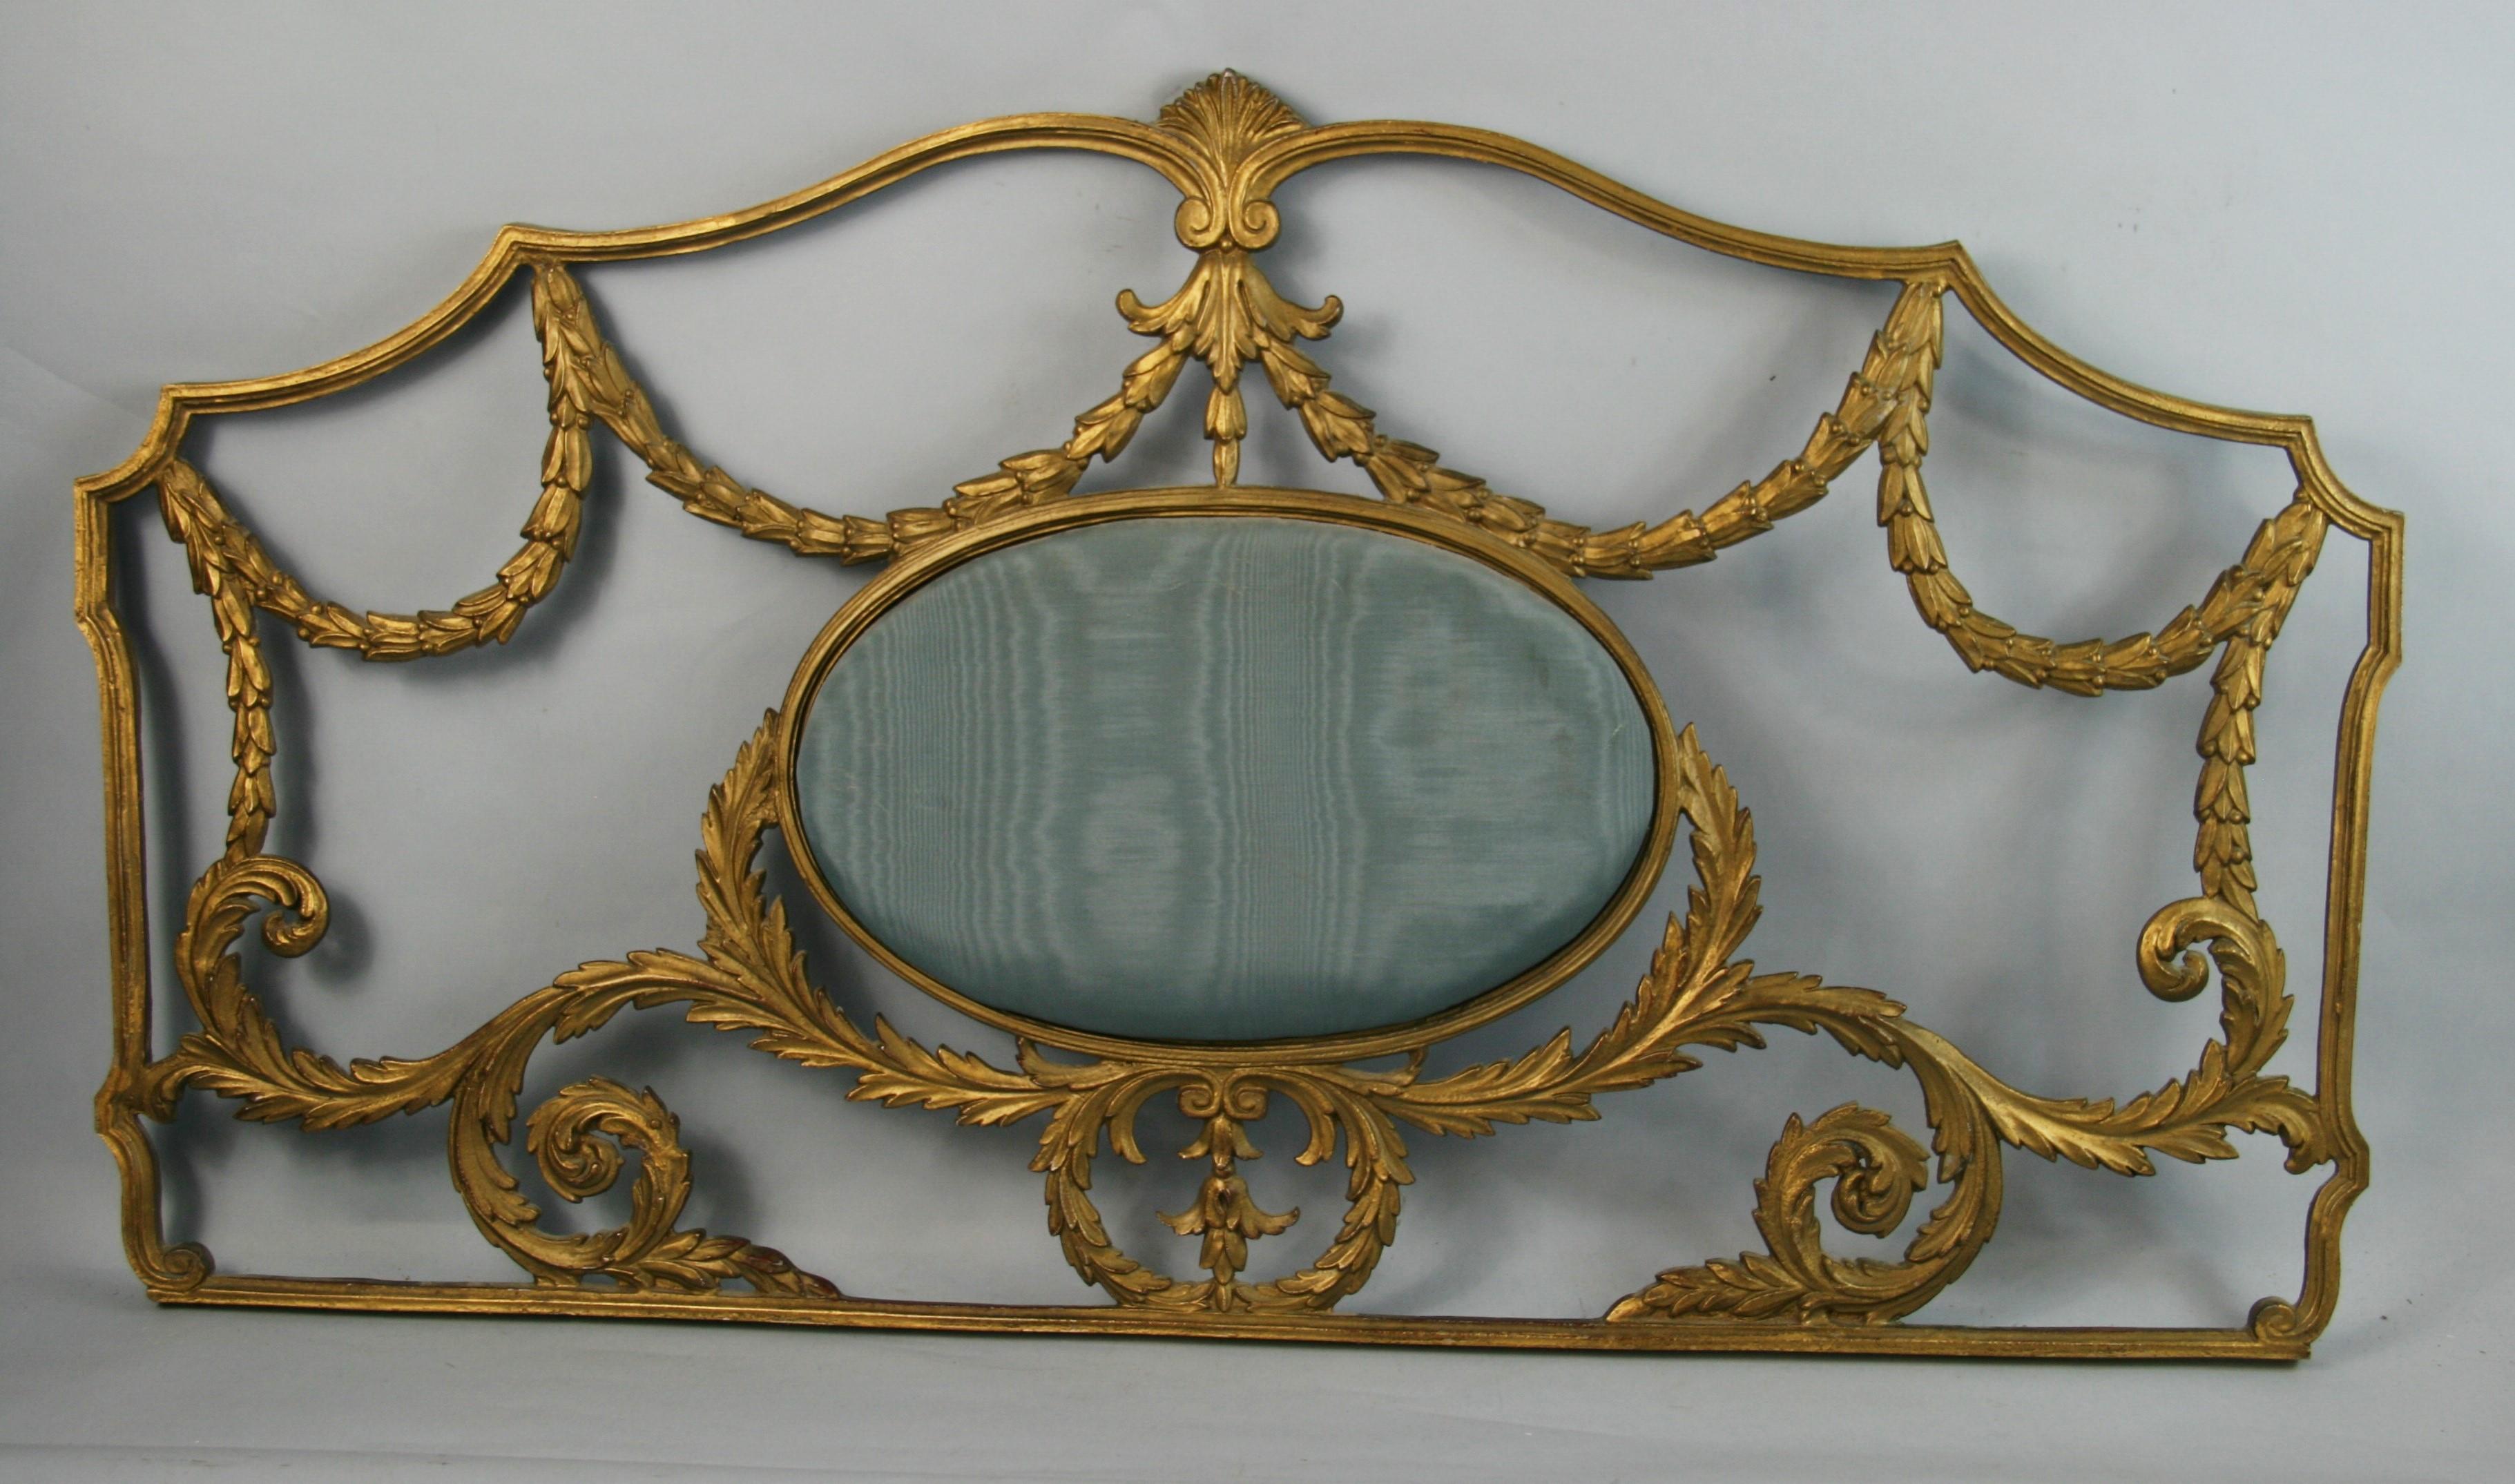 3-678 Palladio gilt metal architectural elements originally used as headboards
Priced individually.
  